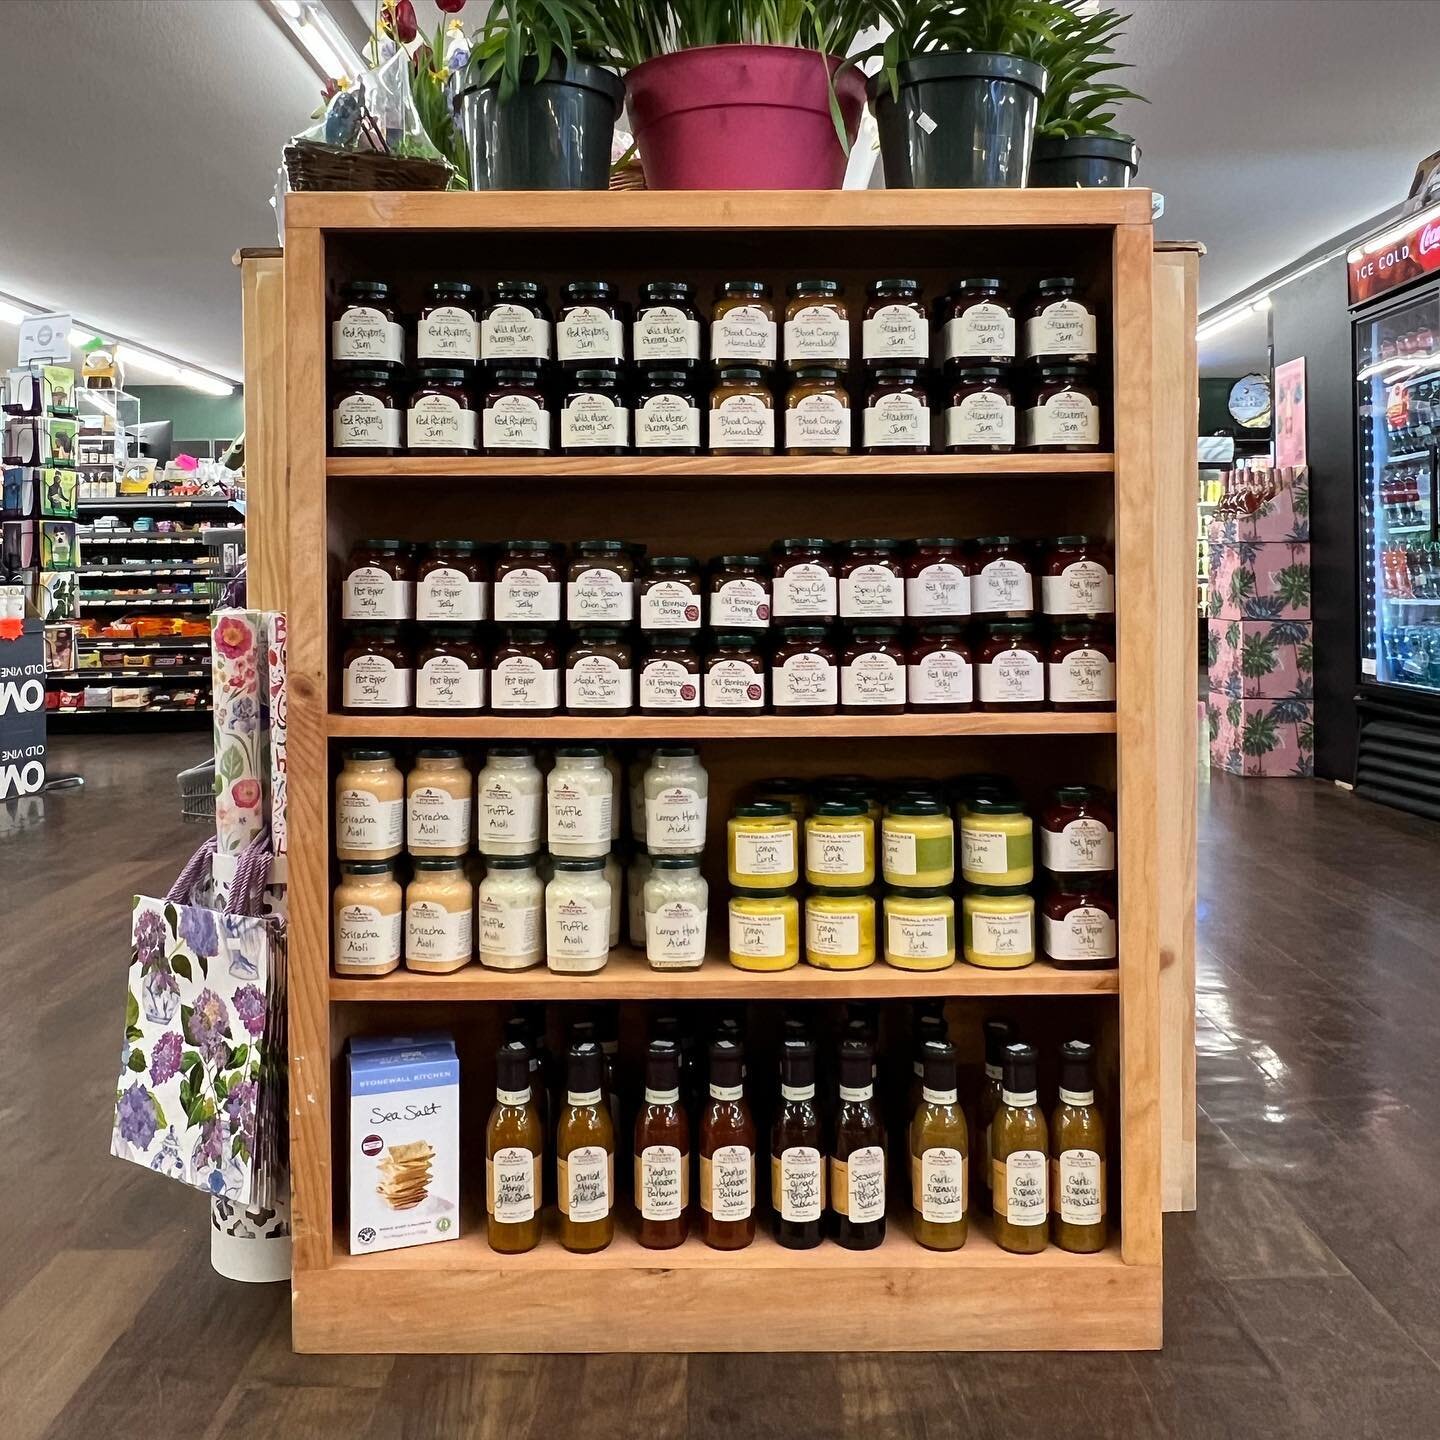 We have a full stock of Stonewall Products again! We are proud to offer their great products to our customers. Stop by Peterson&rsquo;s and try out some of their unique flavors! #capecod #yarmouth #yarmouthport #shoplocalcapecod @stonewallkitchen